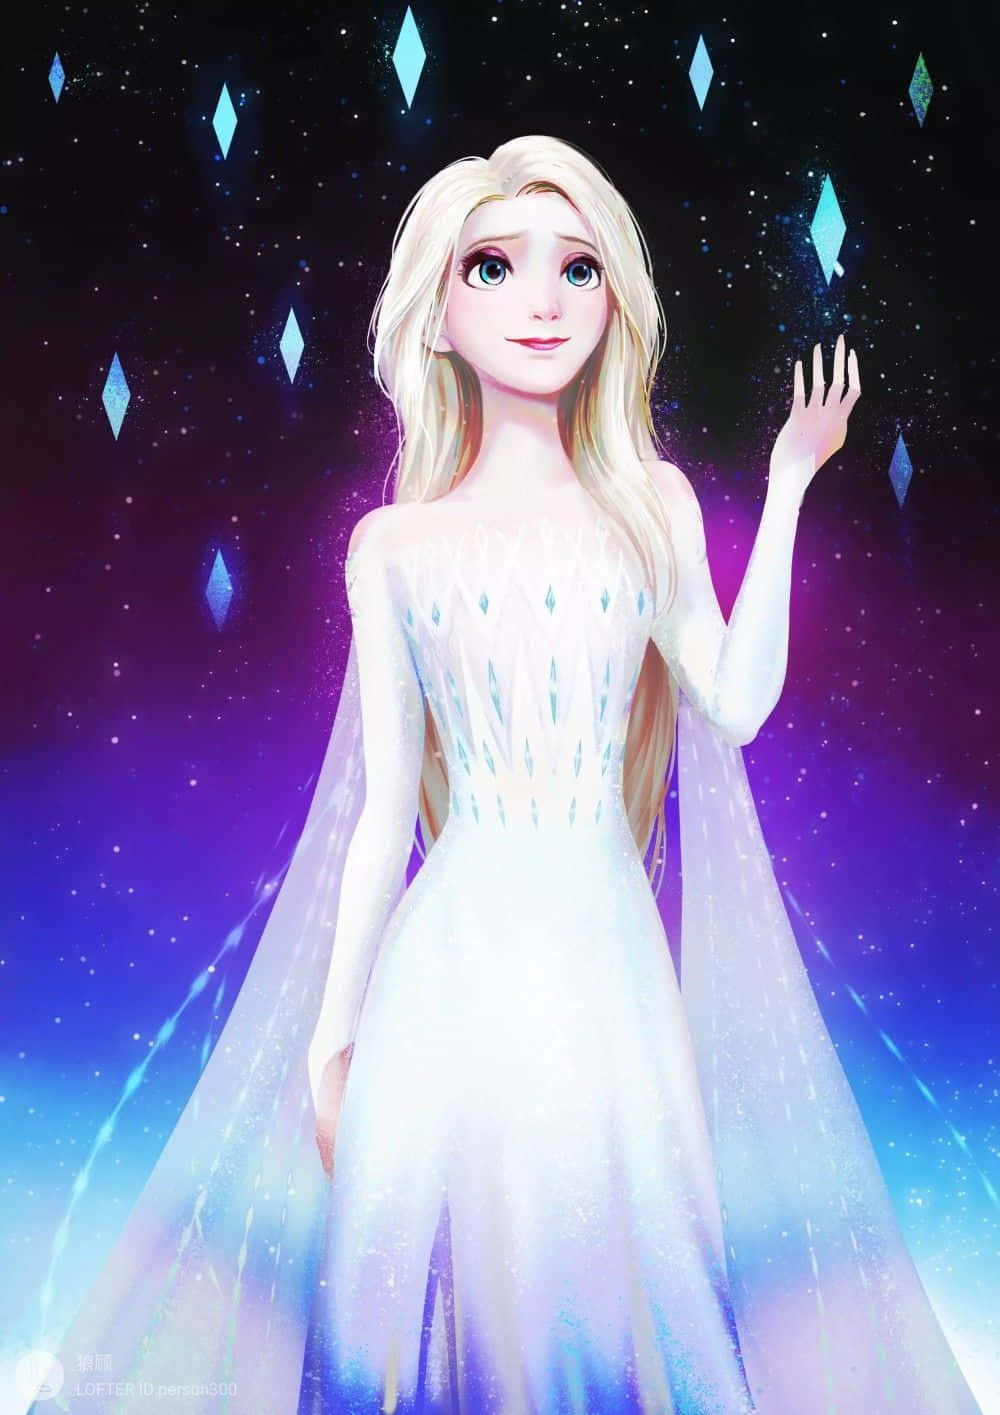 Look at how gorgeous Elsa looks!